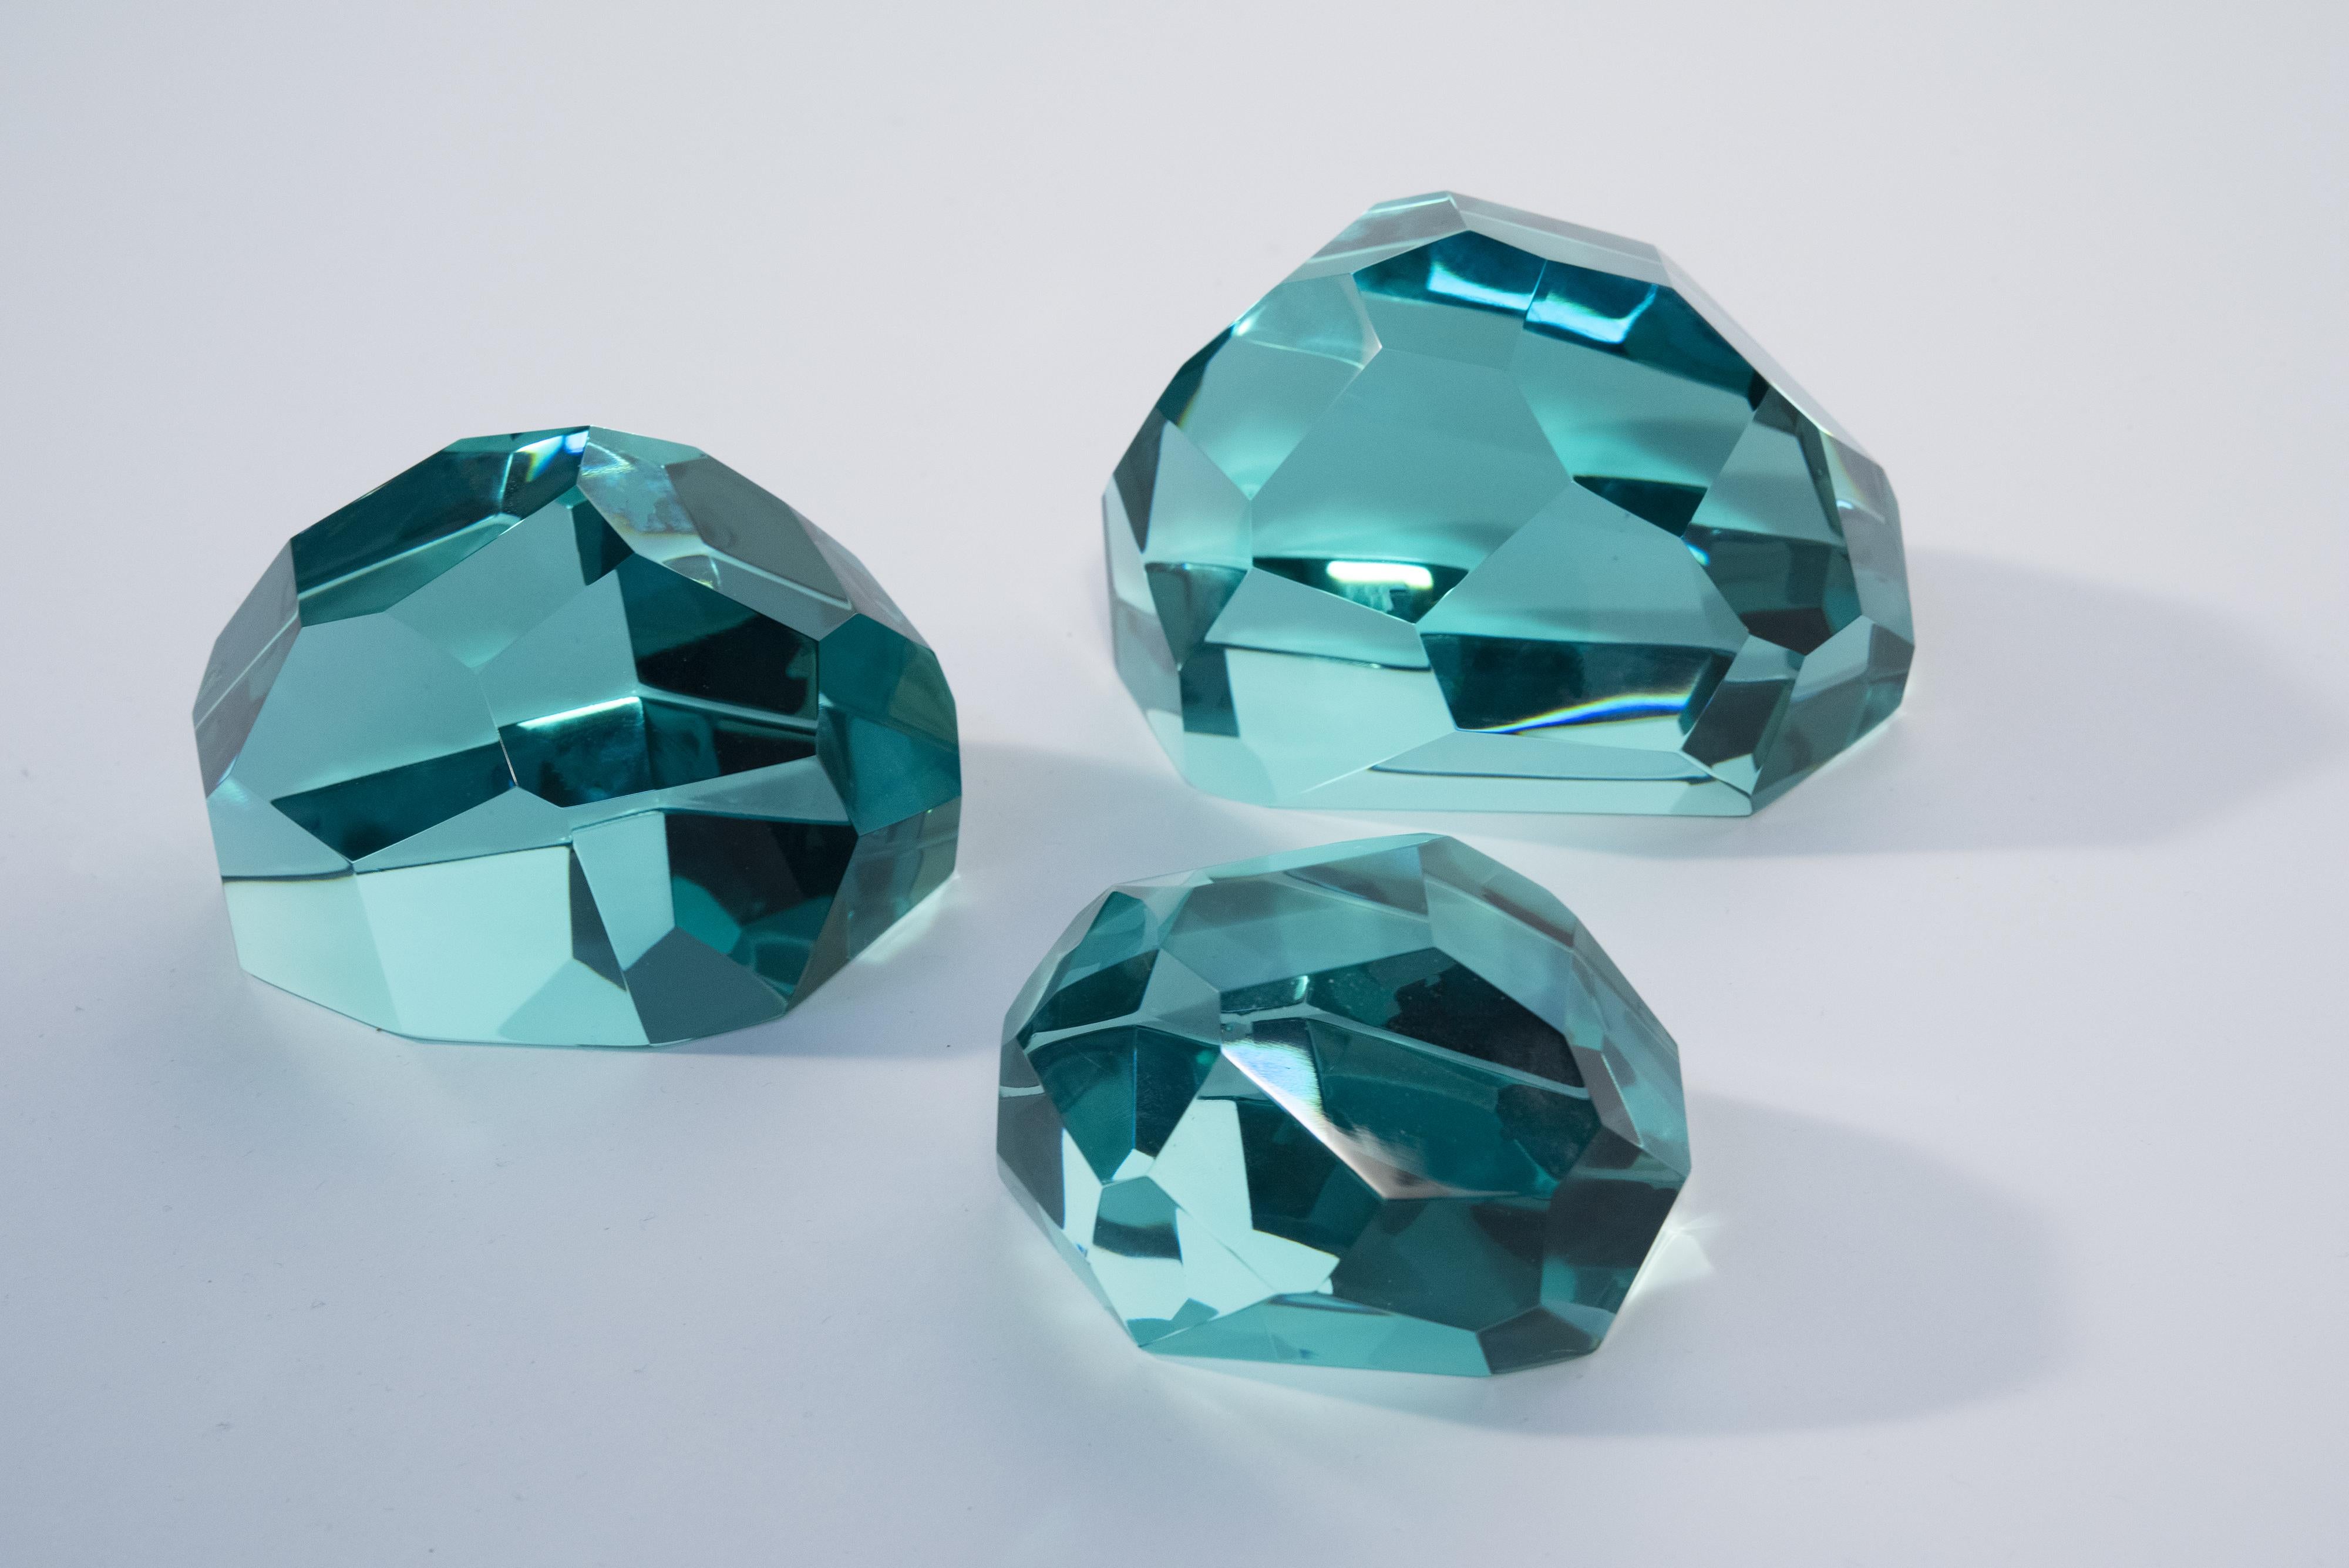 Hand-Crafted Contemporary 'Gems' Set of Three Crystal Sculptures Aquamarine by Ghirò Studio For Sale